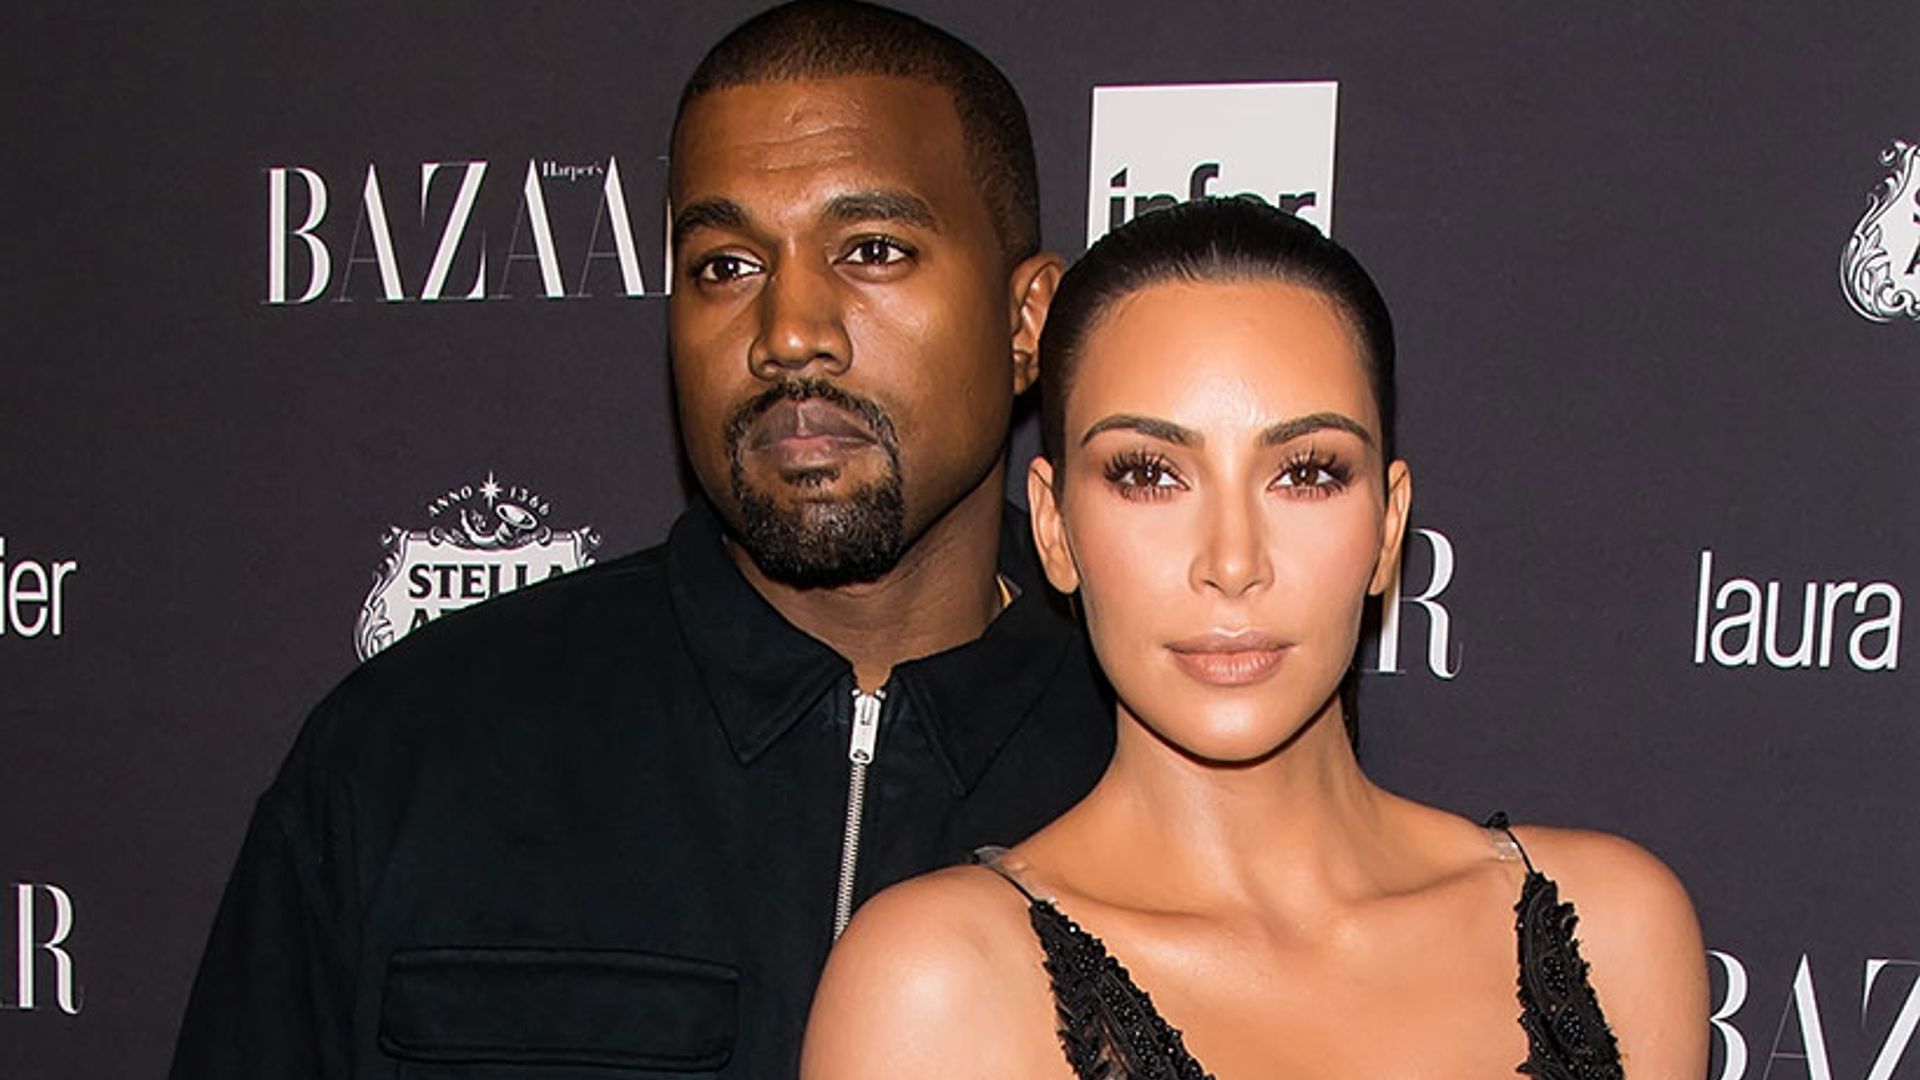 Kim Kardashian confirms third child with Kanye West is on the way via surrogate: 'We're having a baby'